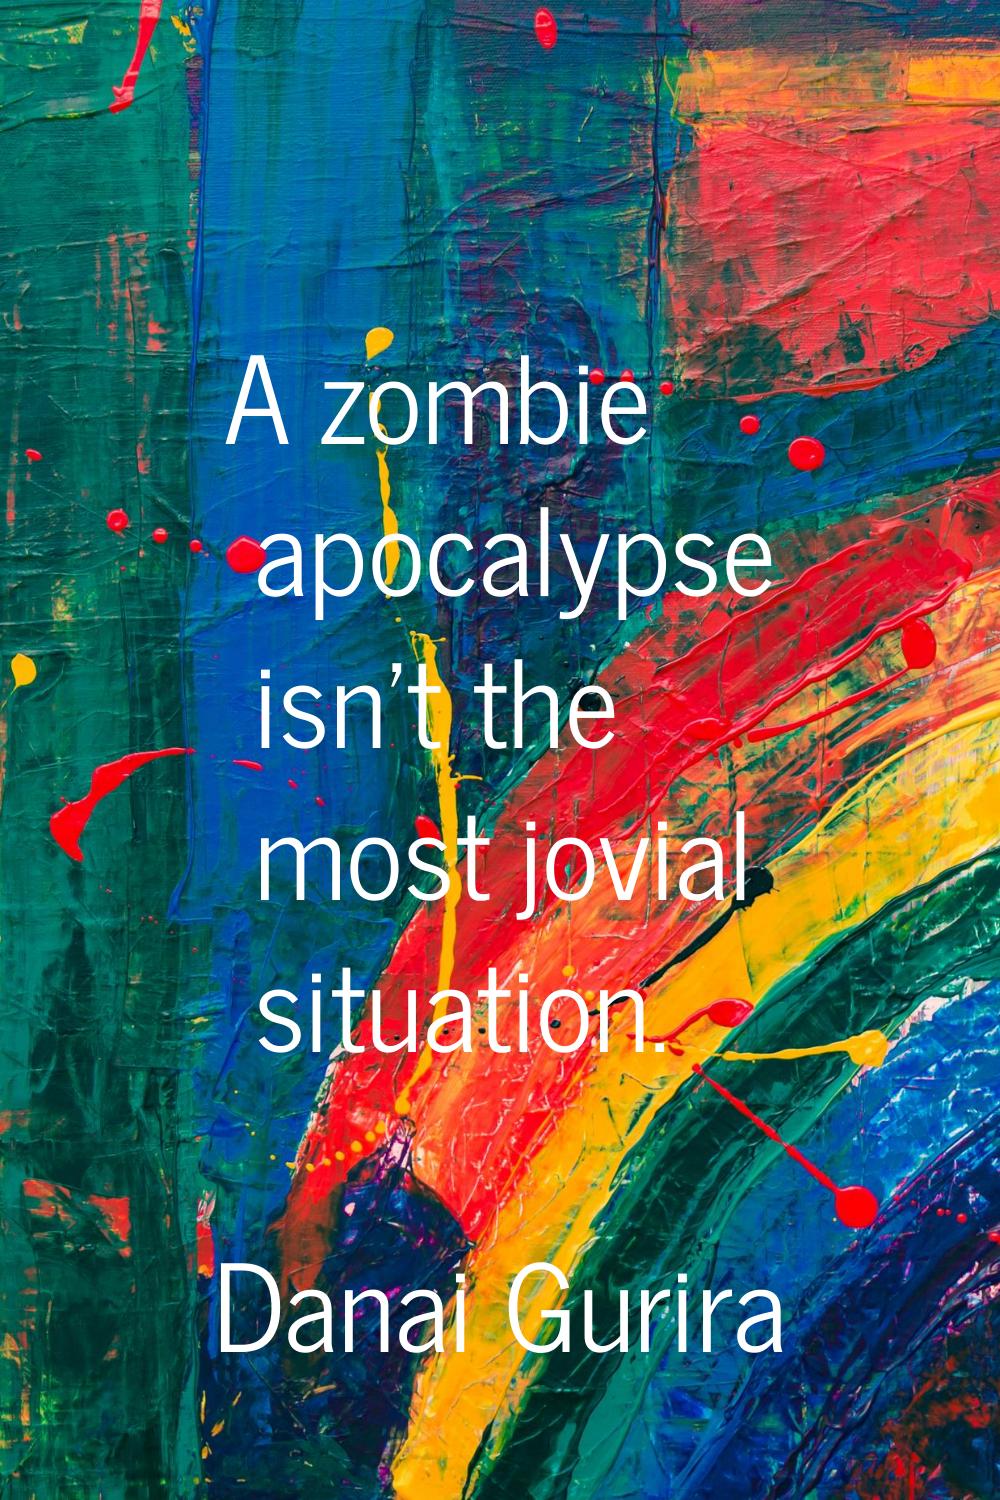 A zombie apocalypse isn't the most jovial situation.